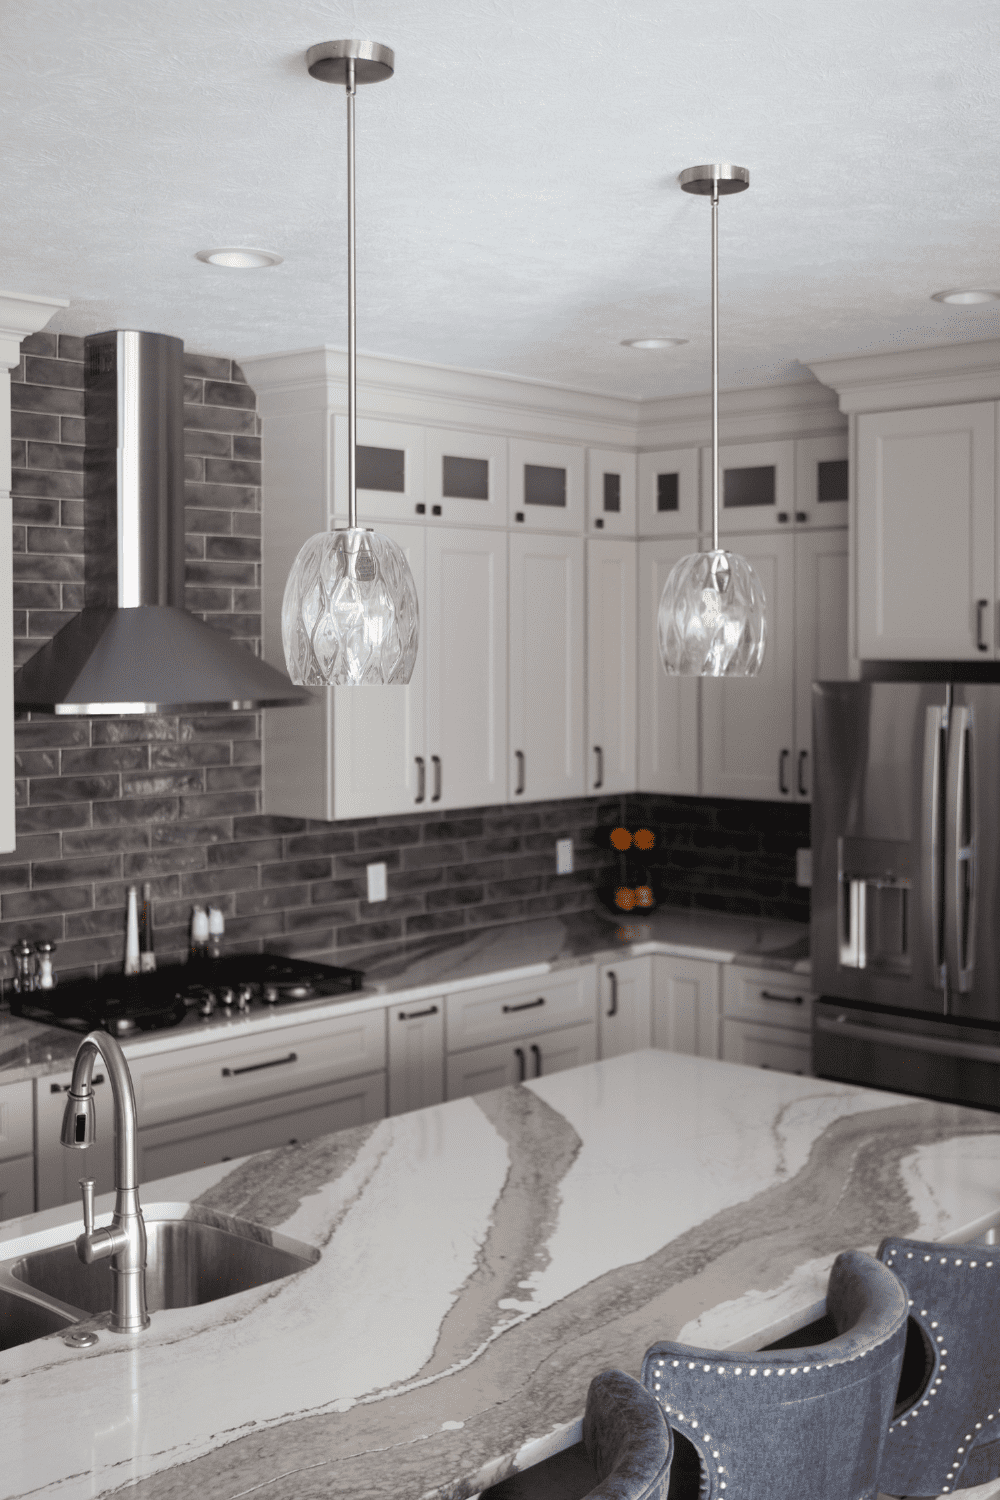 Nicholas Design Build | A kitchen with a marble counter top.